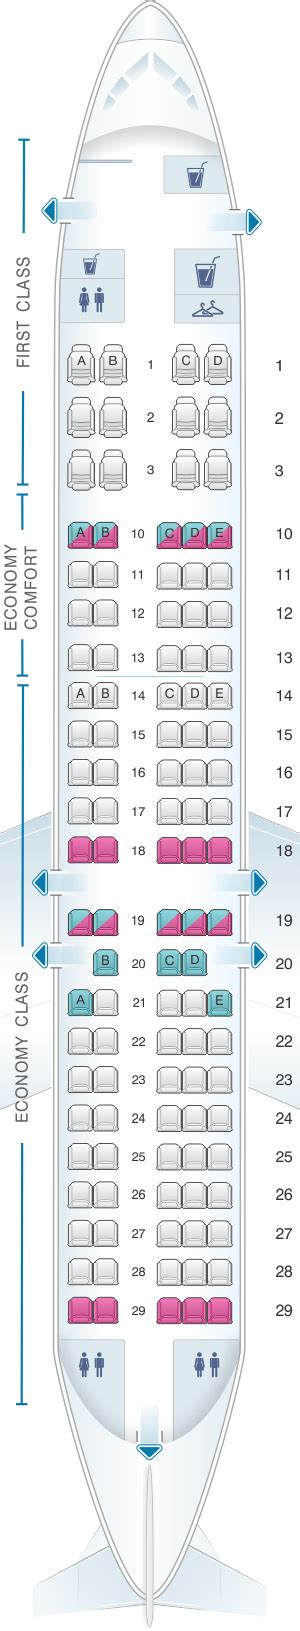 Delta Airlines describes their Airbus A220-100 aircraft as a "state-of-the-art narrowbody jet with all of the amenities and luxury of a widebody aircraft." The interior design of the aircraft is a result of Delta's research asking passengers about their onboard preferences. All seats feature high-resolution entertainment monitors and personal ... . 